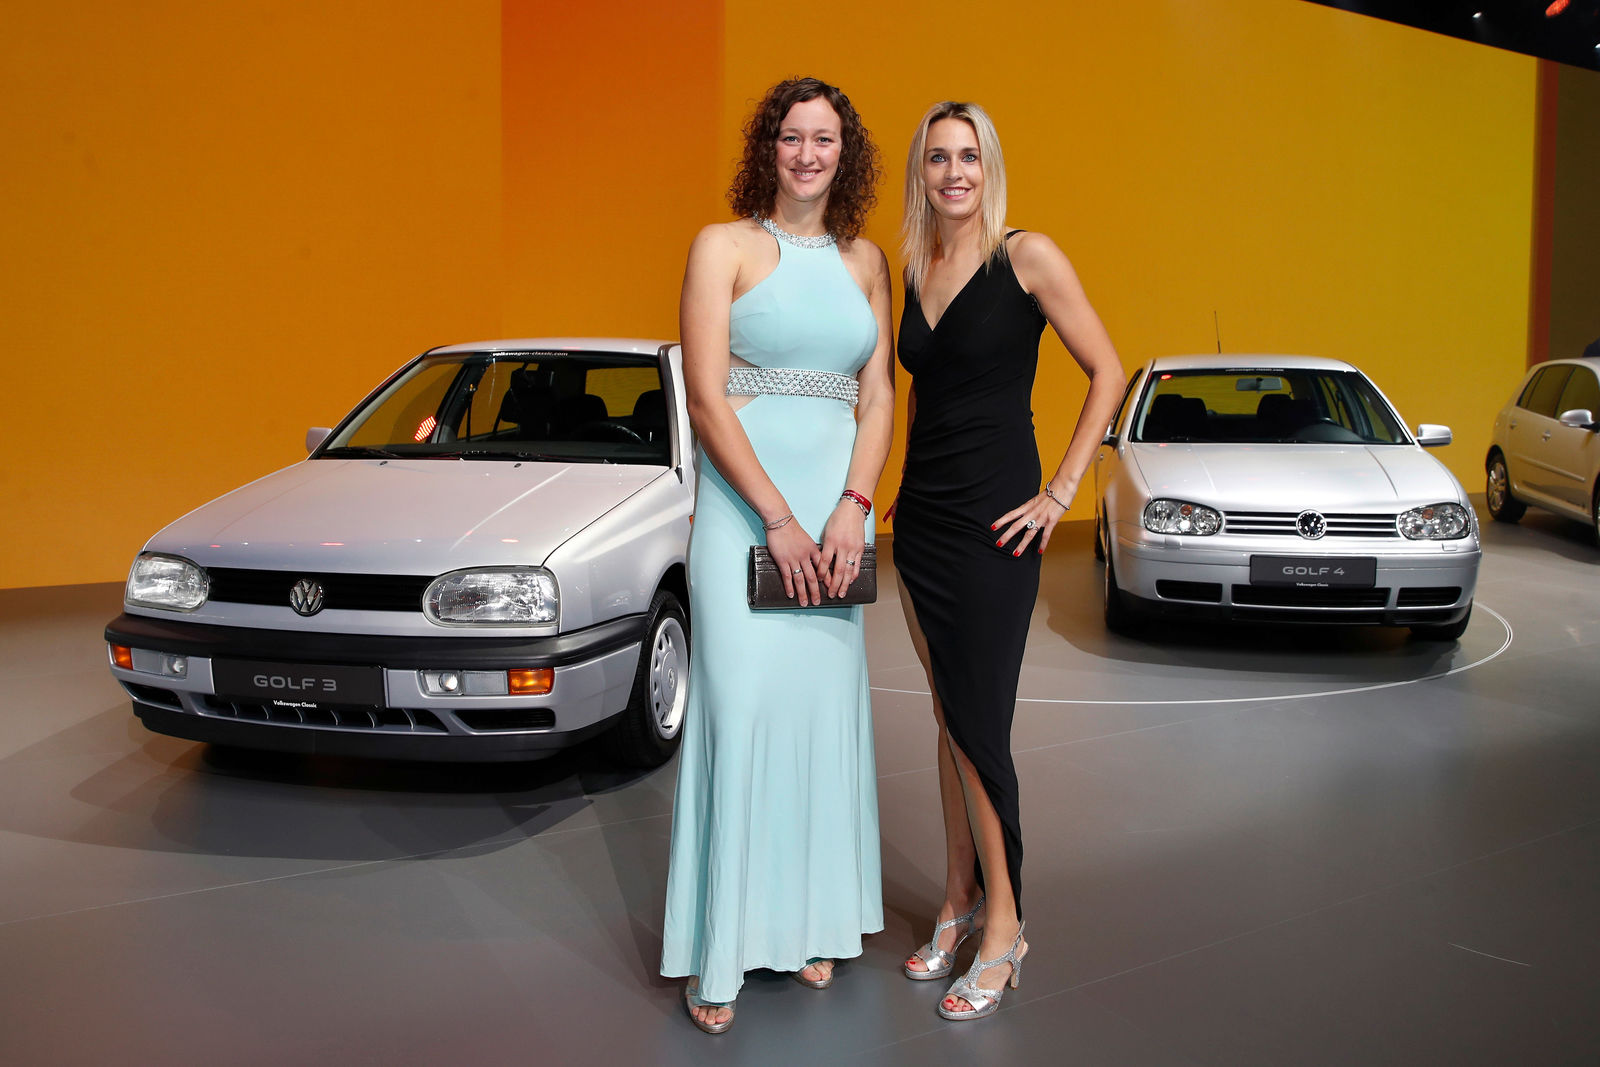 World premiere of the new Golf, October 24th, 2019 in Wolfsburg